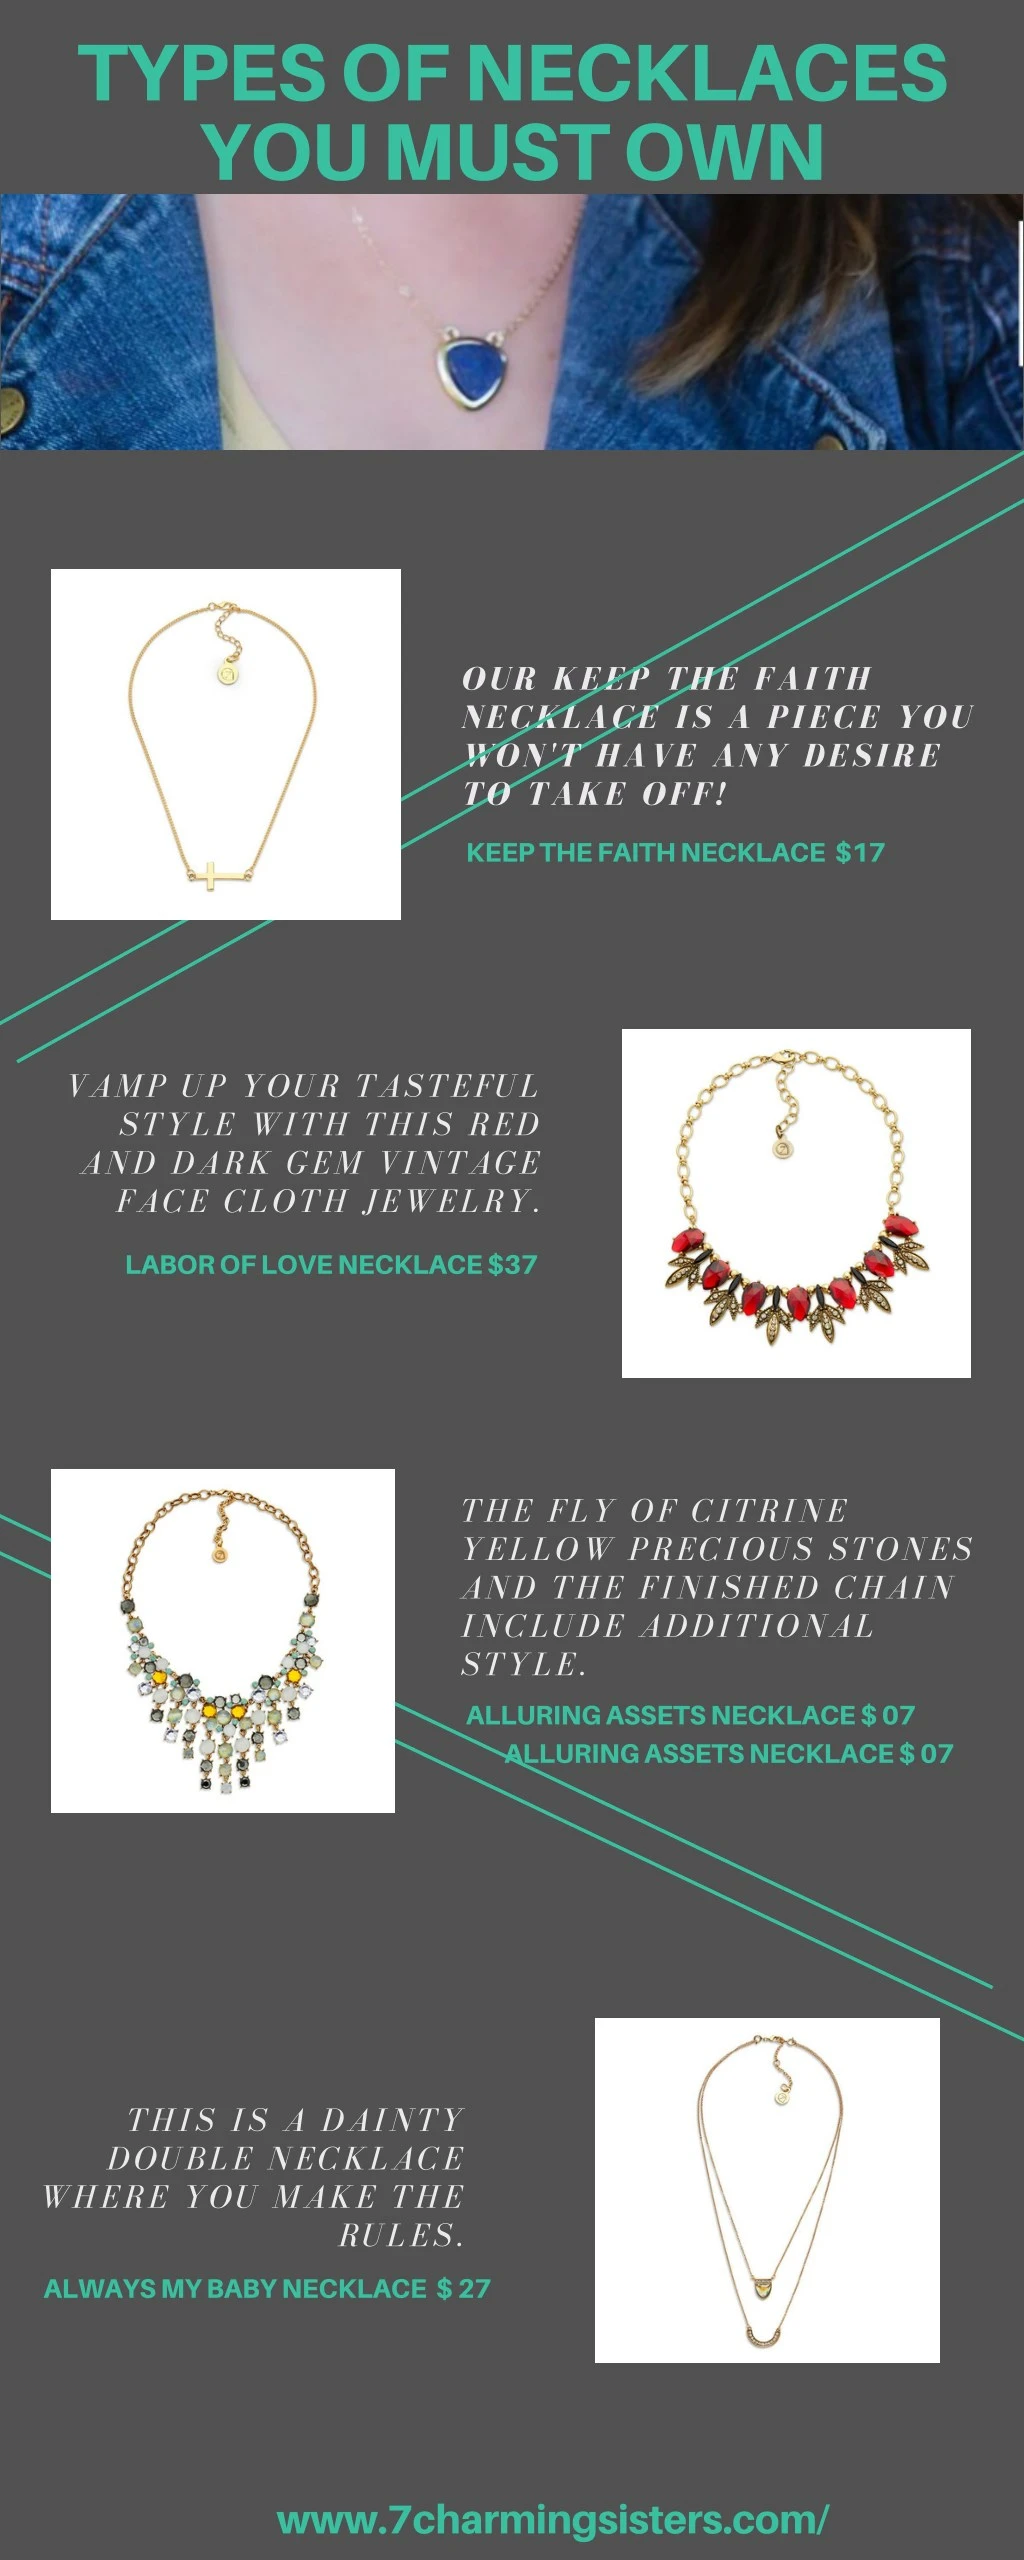 types of necklaces you must own